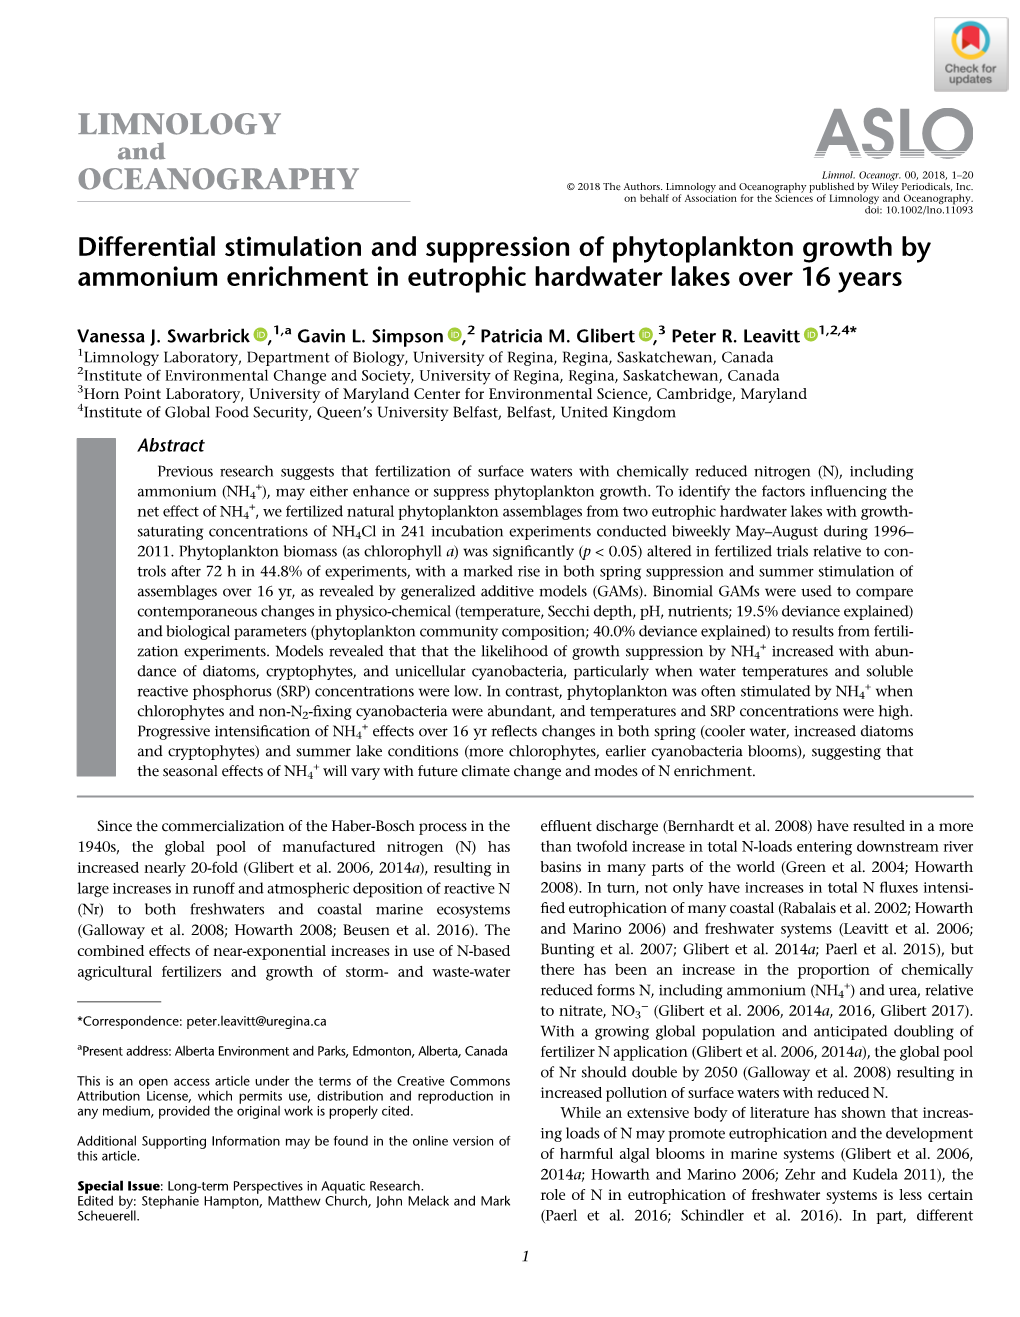 Differential Stimulation and Suppression of Phytoplankton Growth by Ammonium Enrichment in Eutrophic Hardwater Lakes Over 16 Years